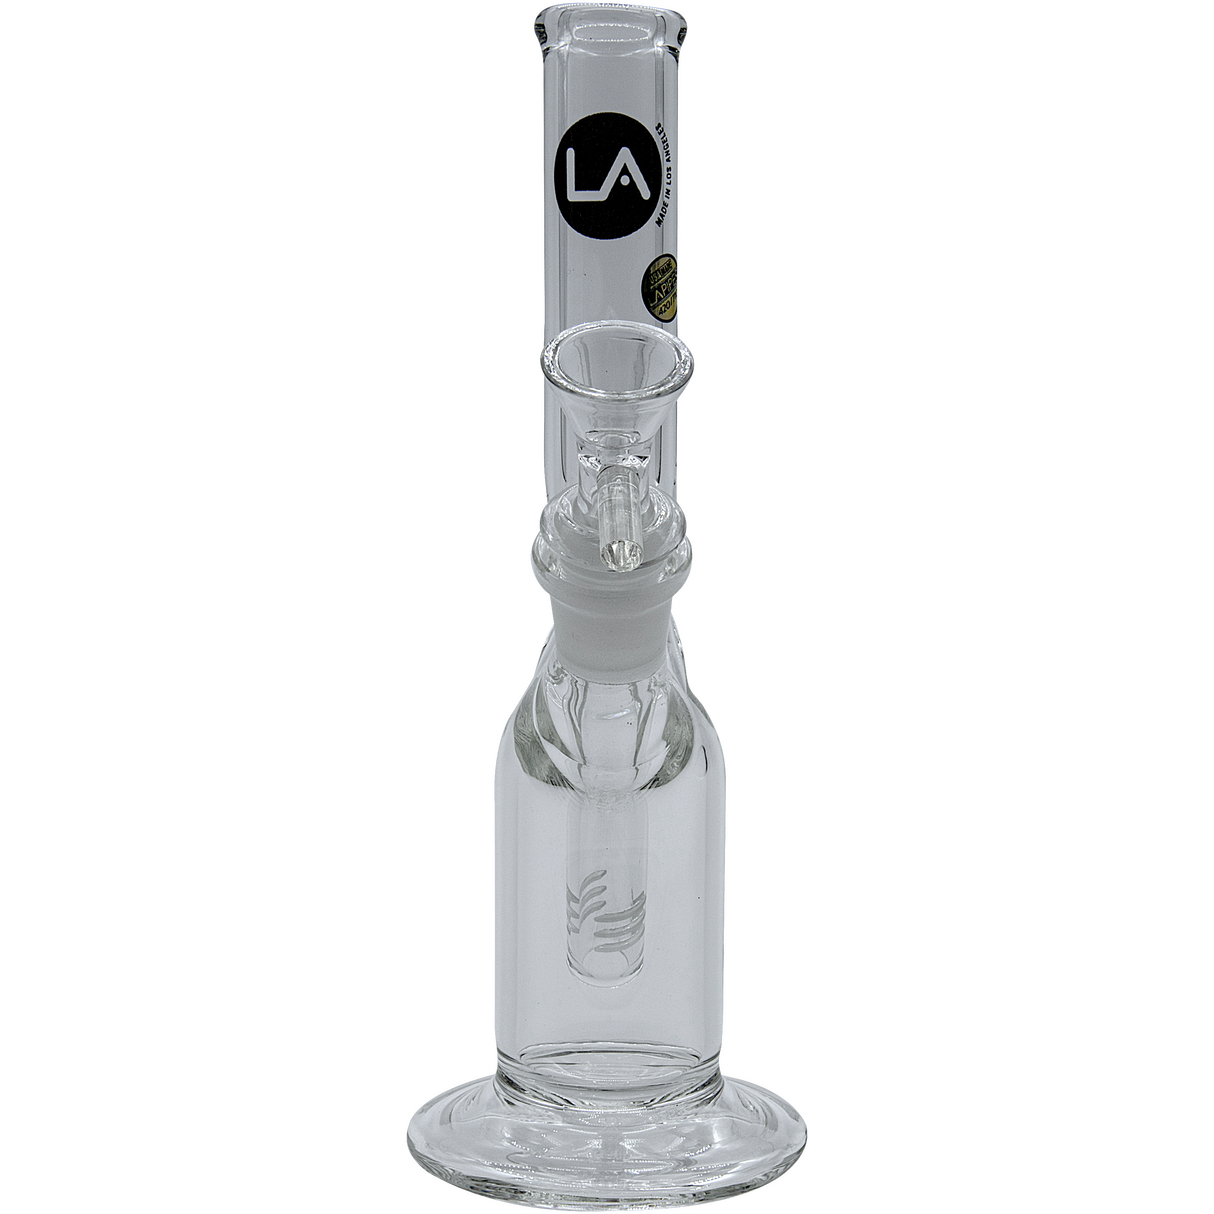 LA Pipes "The Zig" Straight Zong Style Bong, 8" Height, Borosilicate Glass, Front View